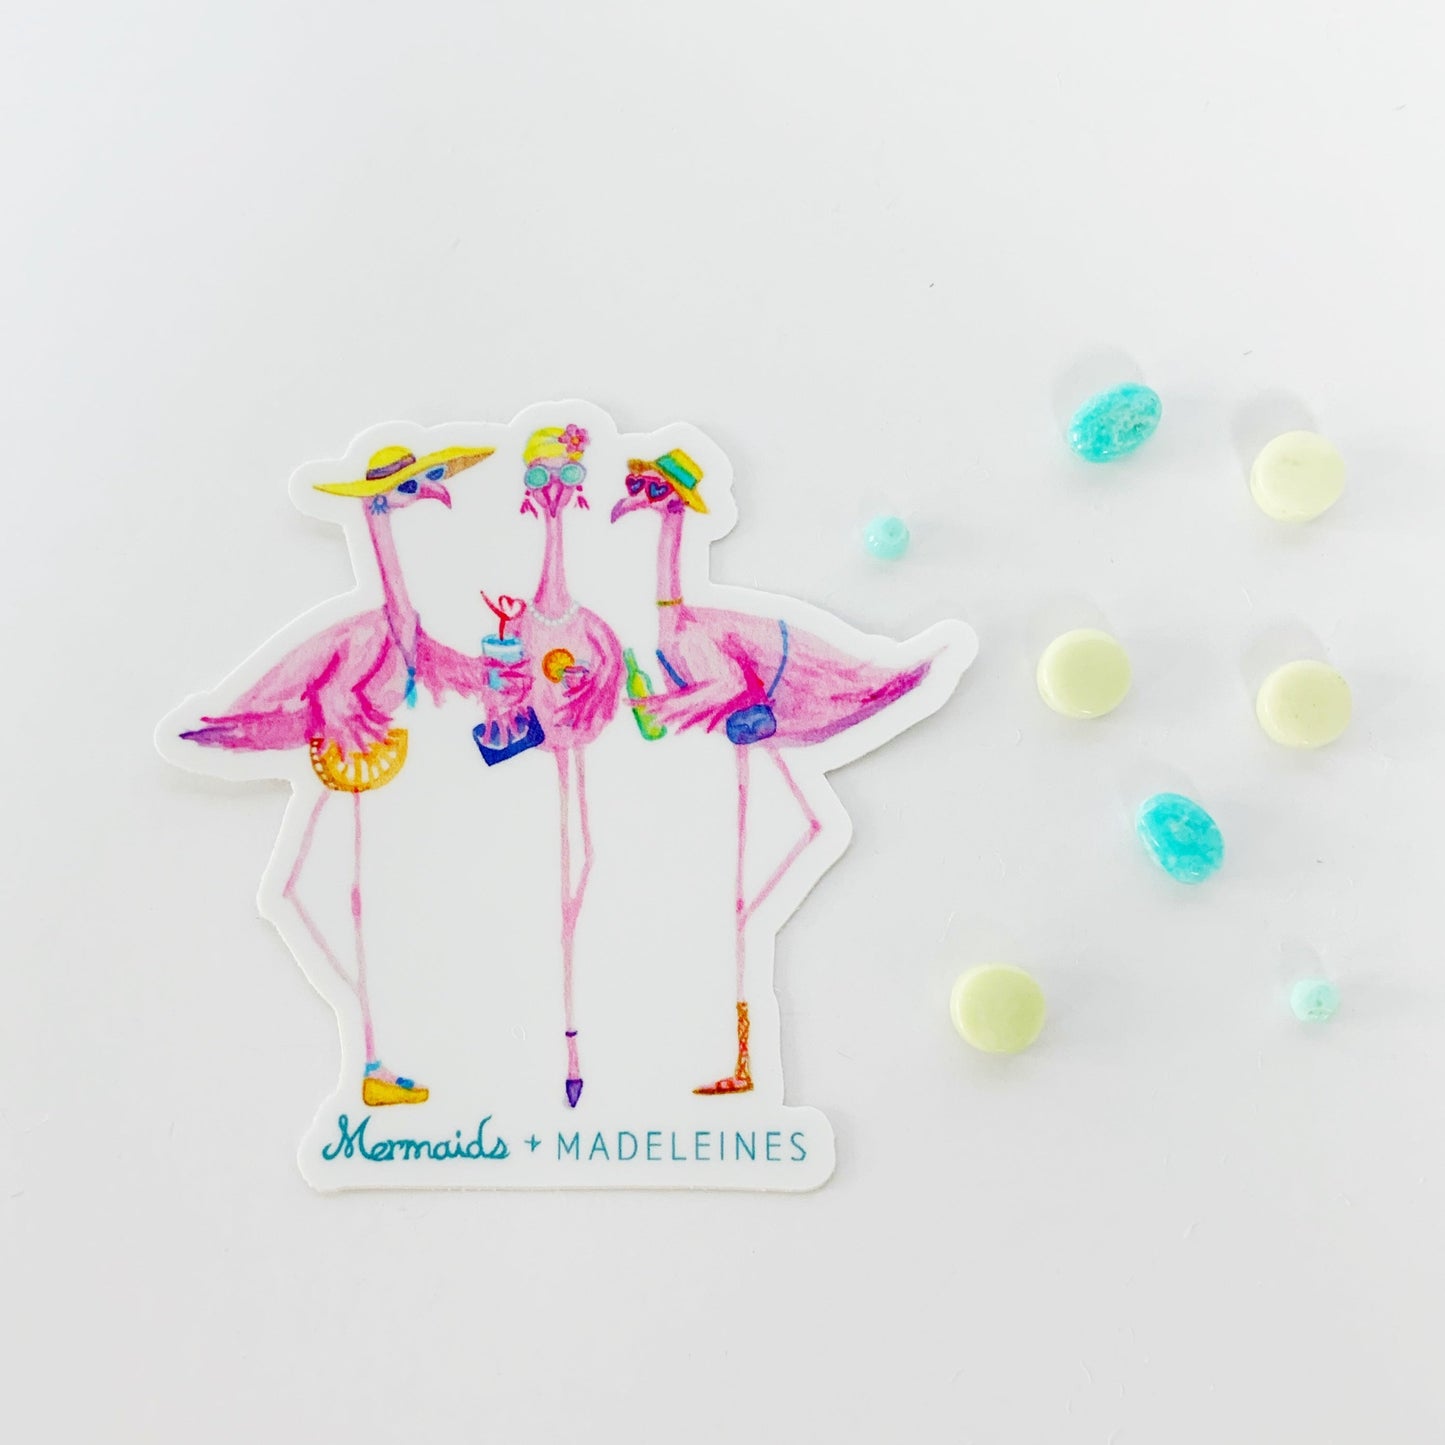 The flamingal sticker is created from original artwork made with acrylic paint and marker its 3 flamingo ladies dressed in summer hats and various footwear. This is a picture of one sticker on a white background